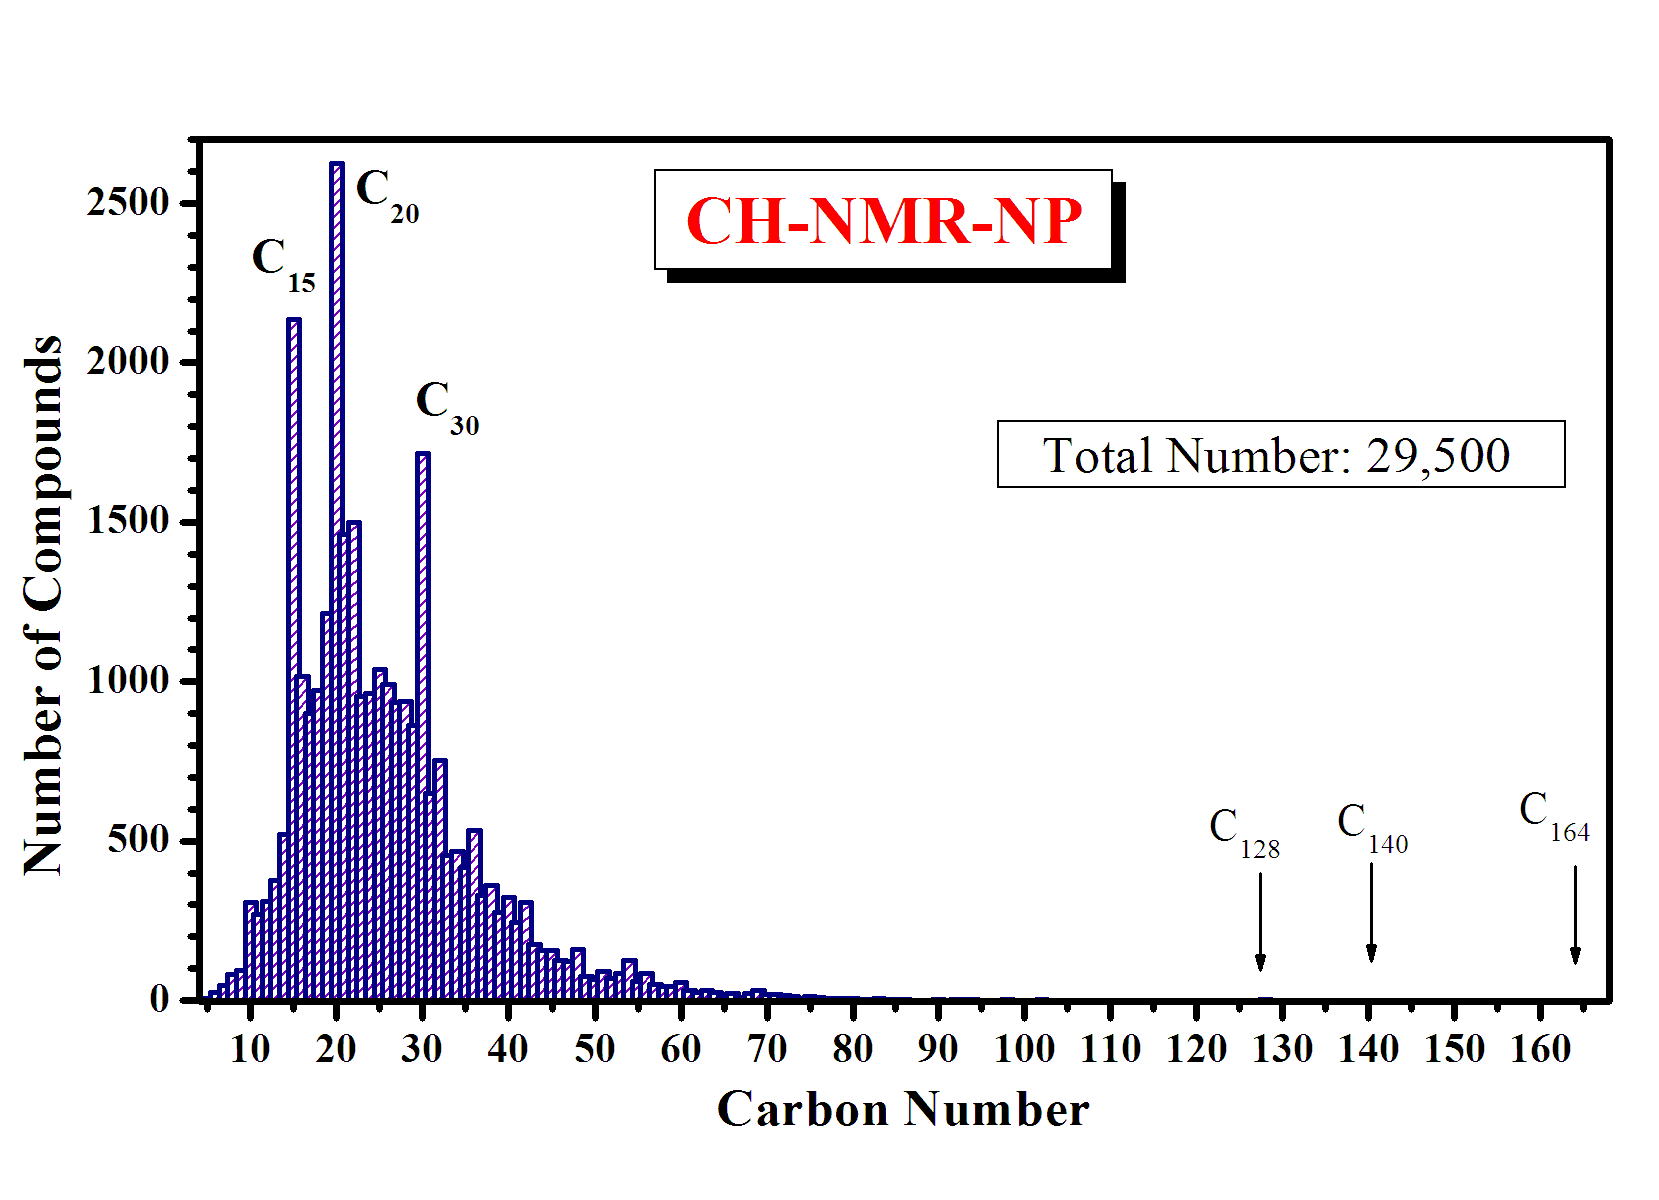 Distribution by carbon number